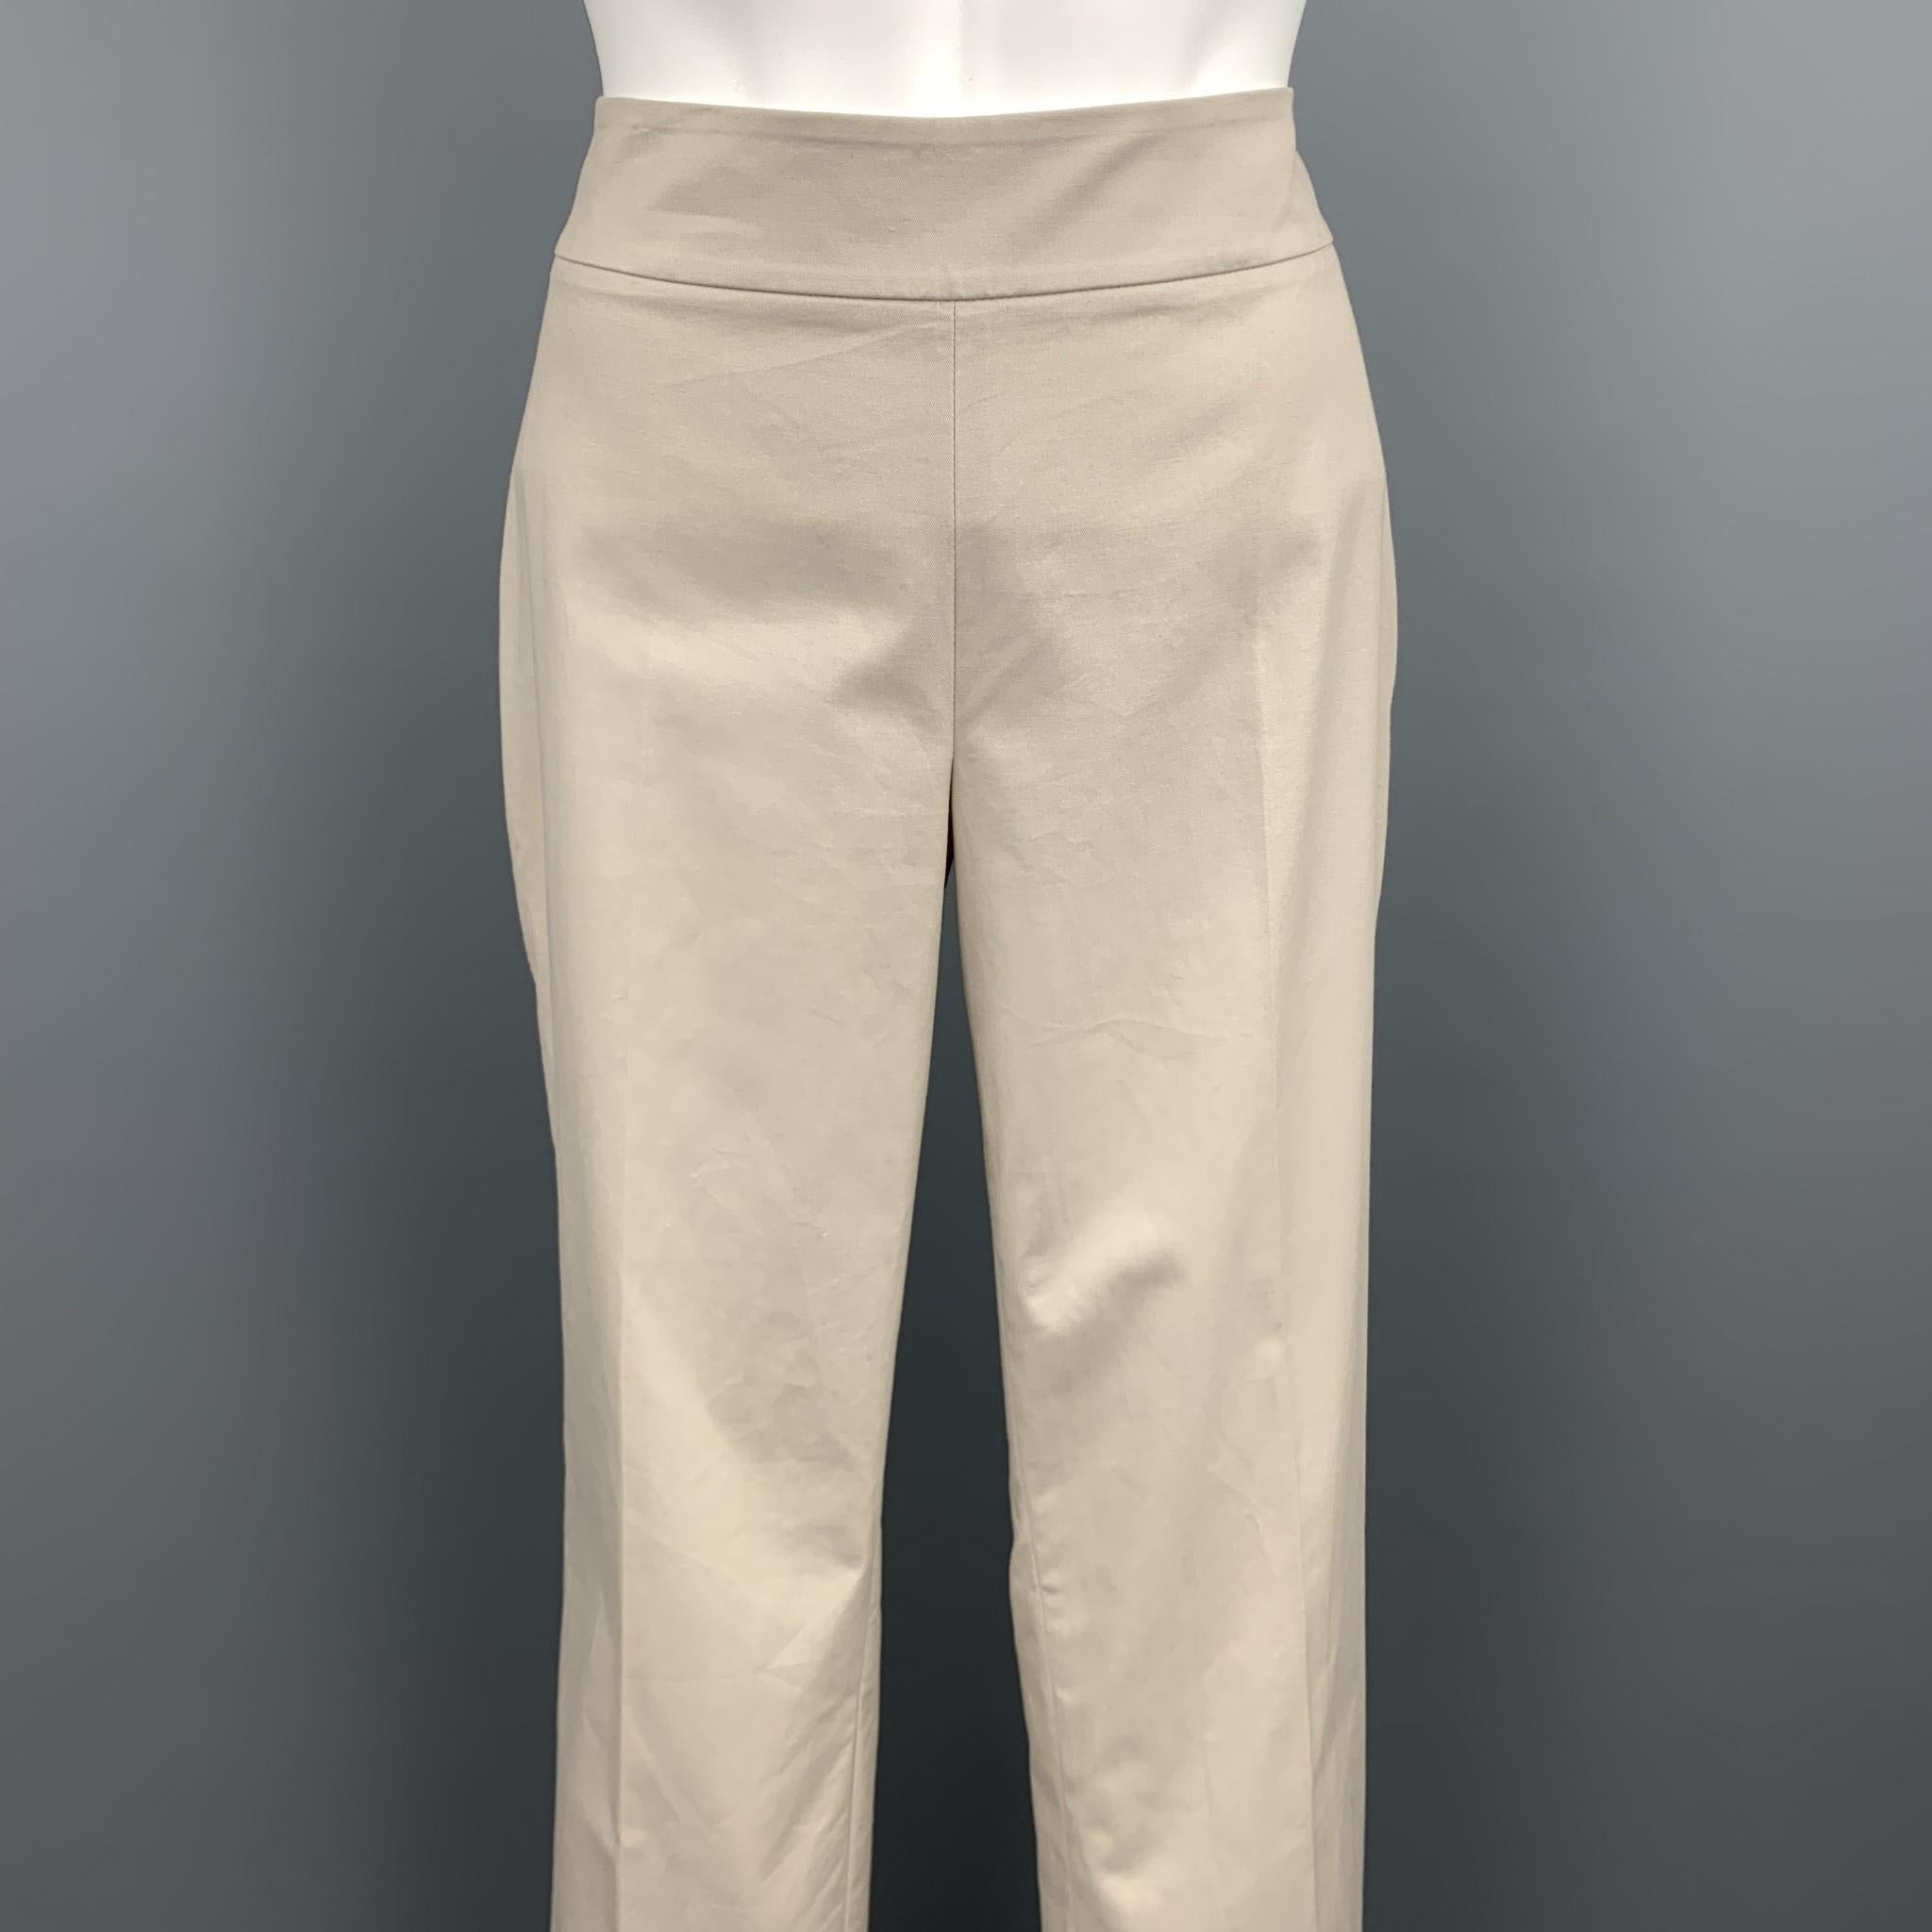 AKRIS casual pants comes in a khaki cotton featuring a straight leg and a side zipper closure. 

Very Good Pre-Owned Condition.
Marked:  US 4 / F 36 / D 34

Measurements:

Waist: 28 in. 
Rise: 8 in. 
Inseam: 29 in. 